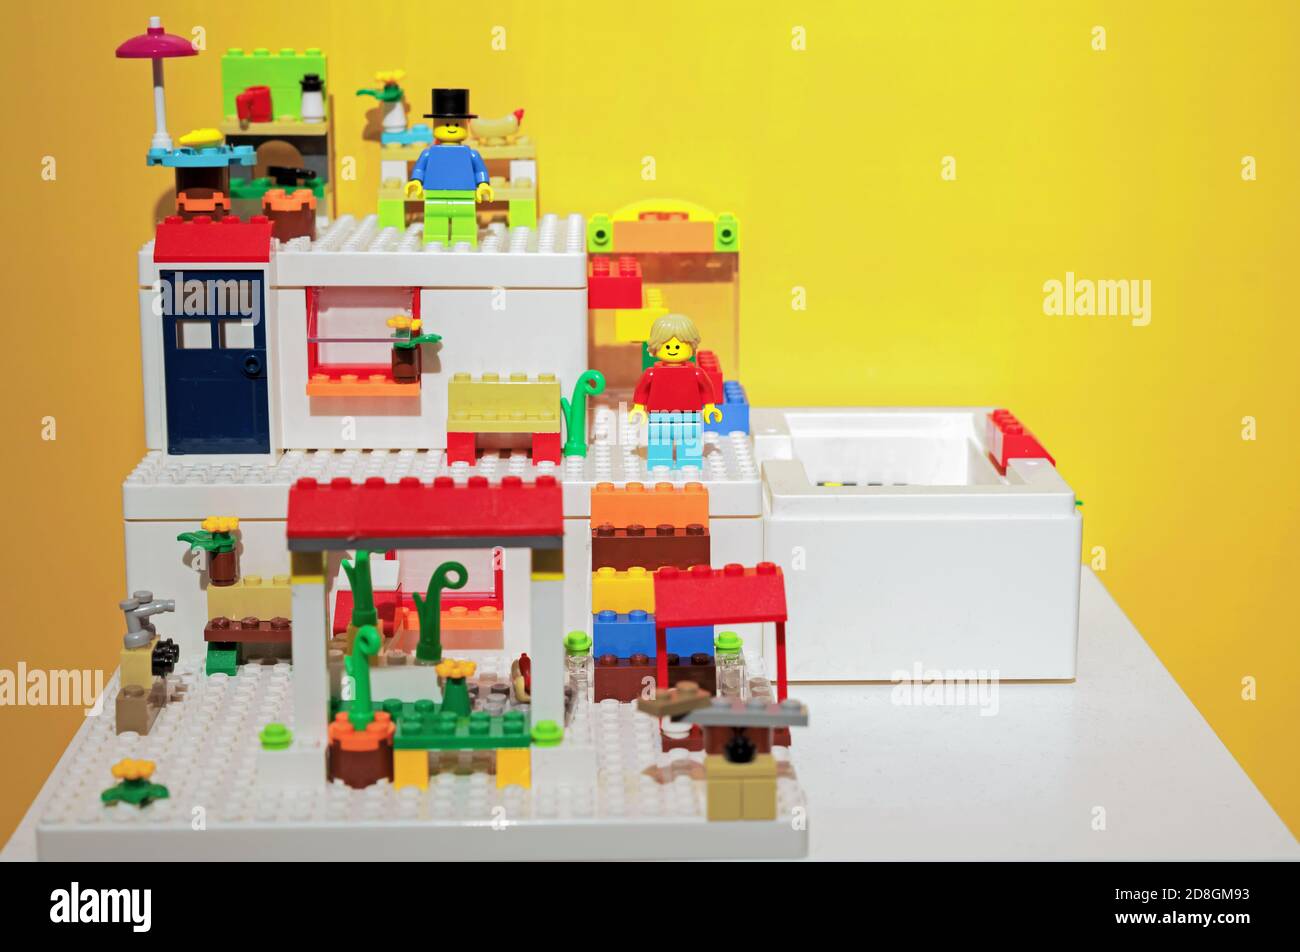 Construction set with bright plastic details for children's creativity. Stock Photo